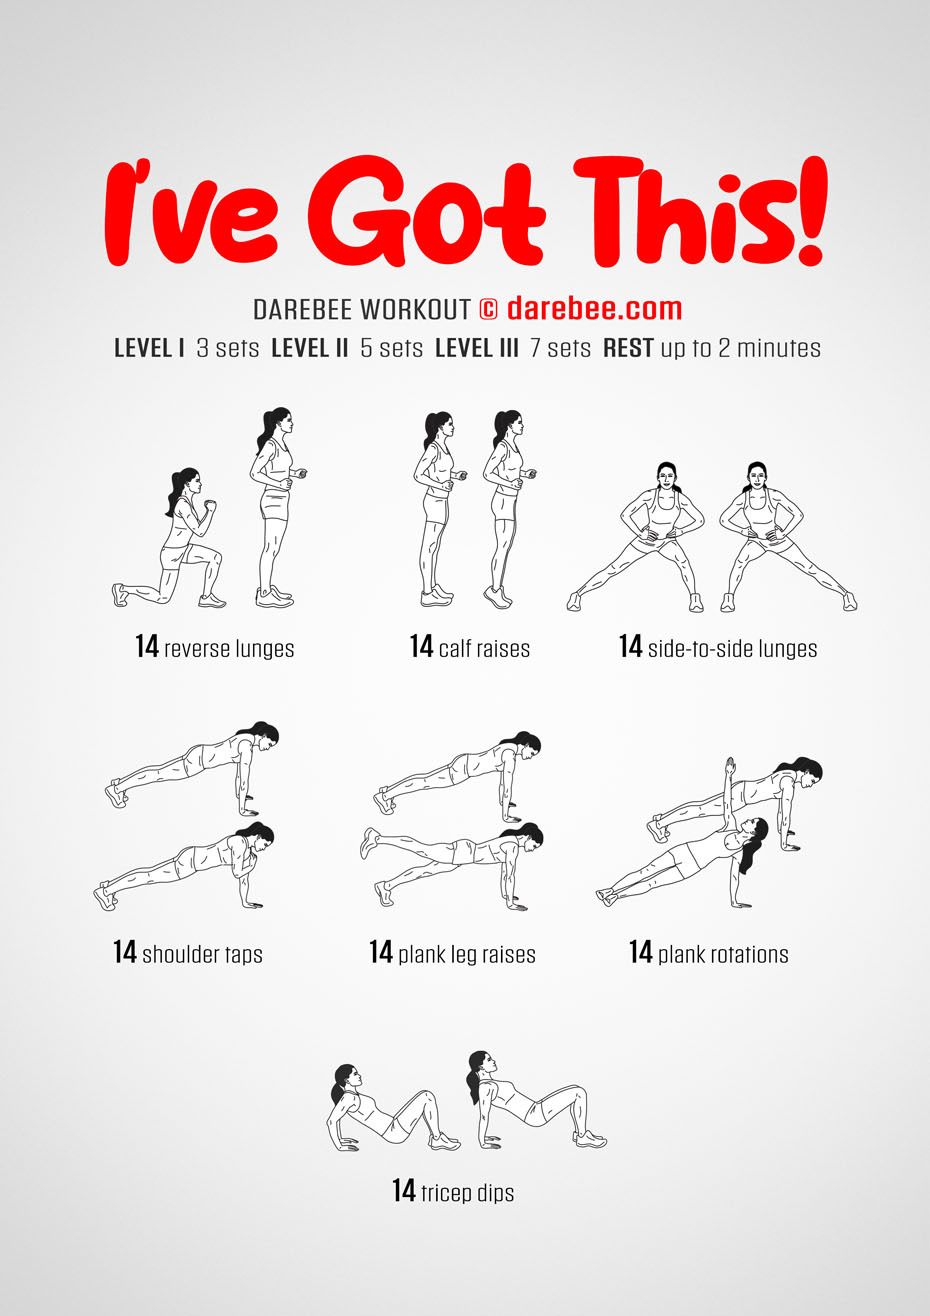 I've Got This! is a Darebee home-fitness workout specifically designed to help you gain even better control of your body.